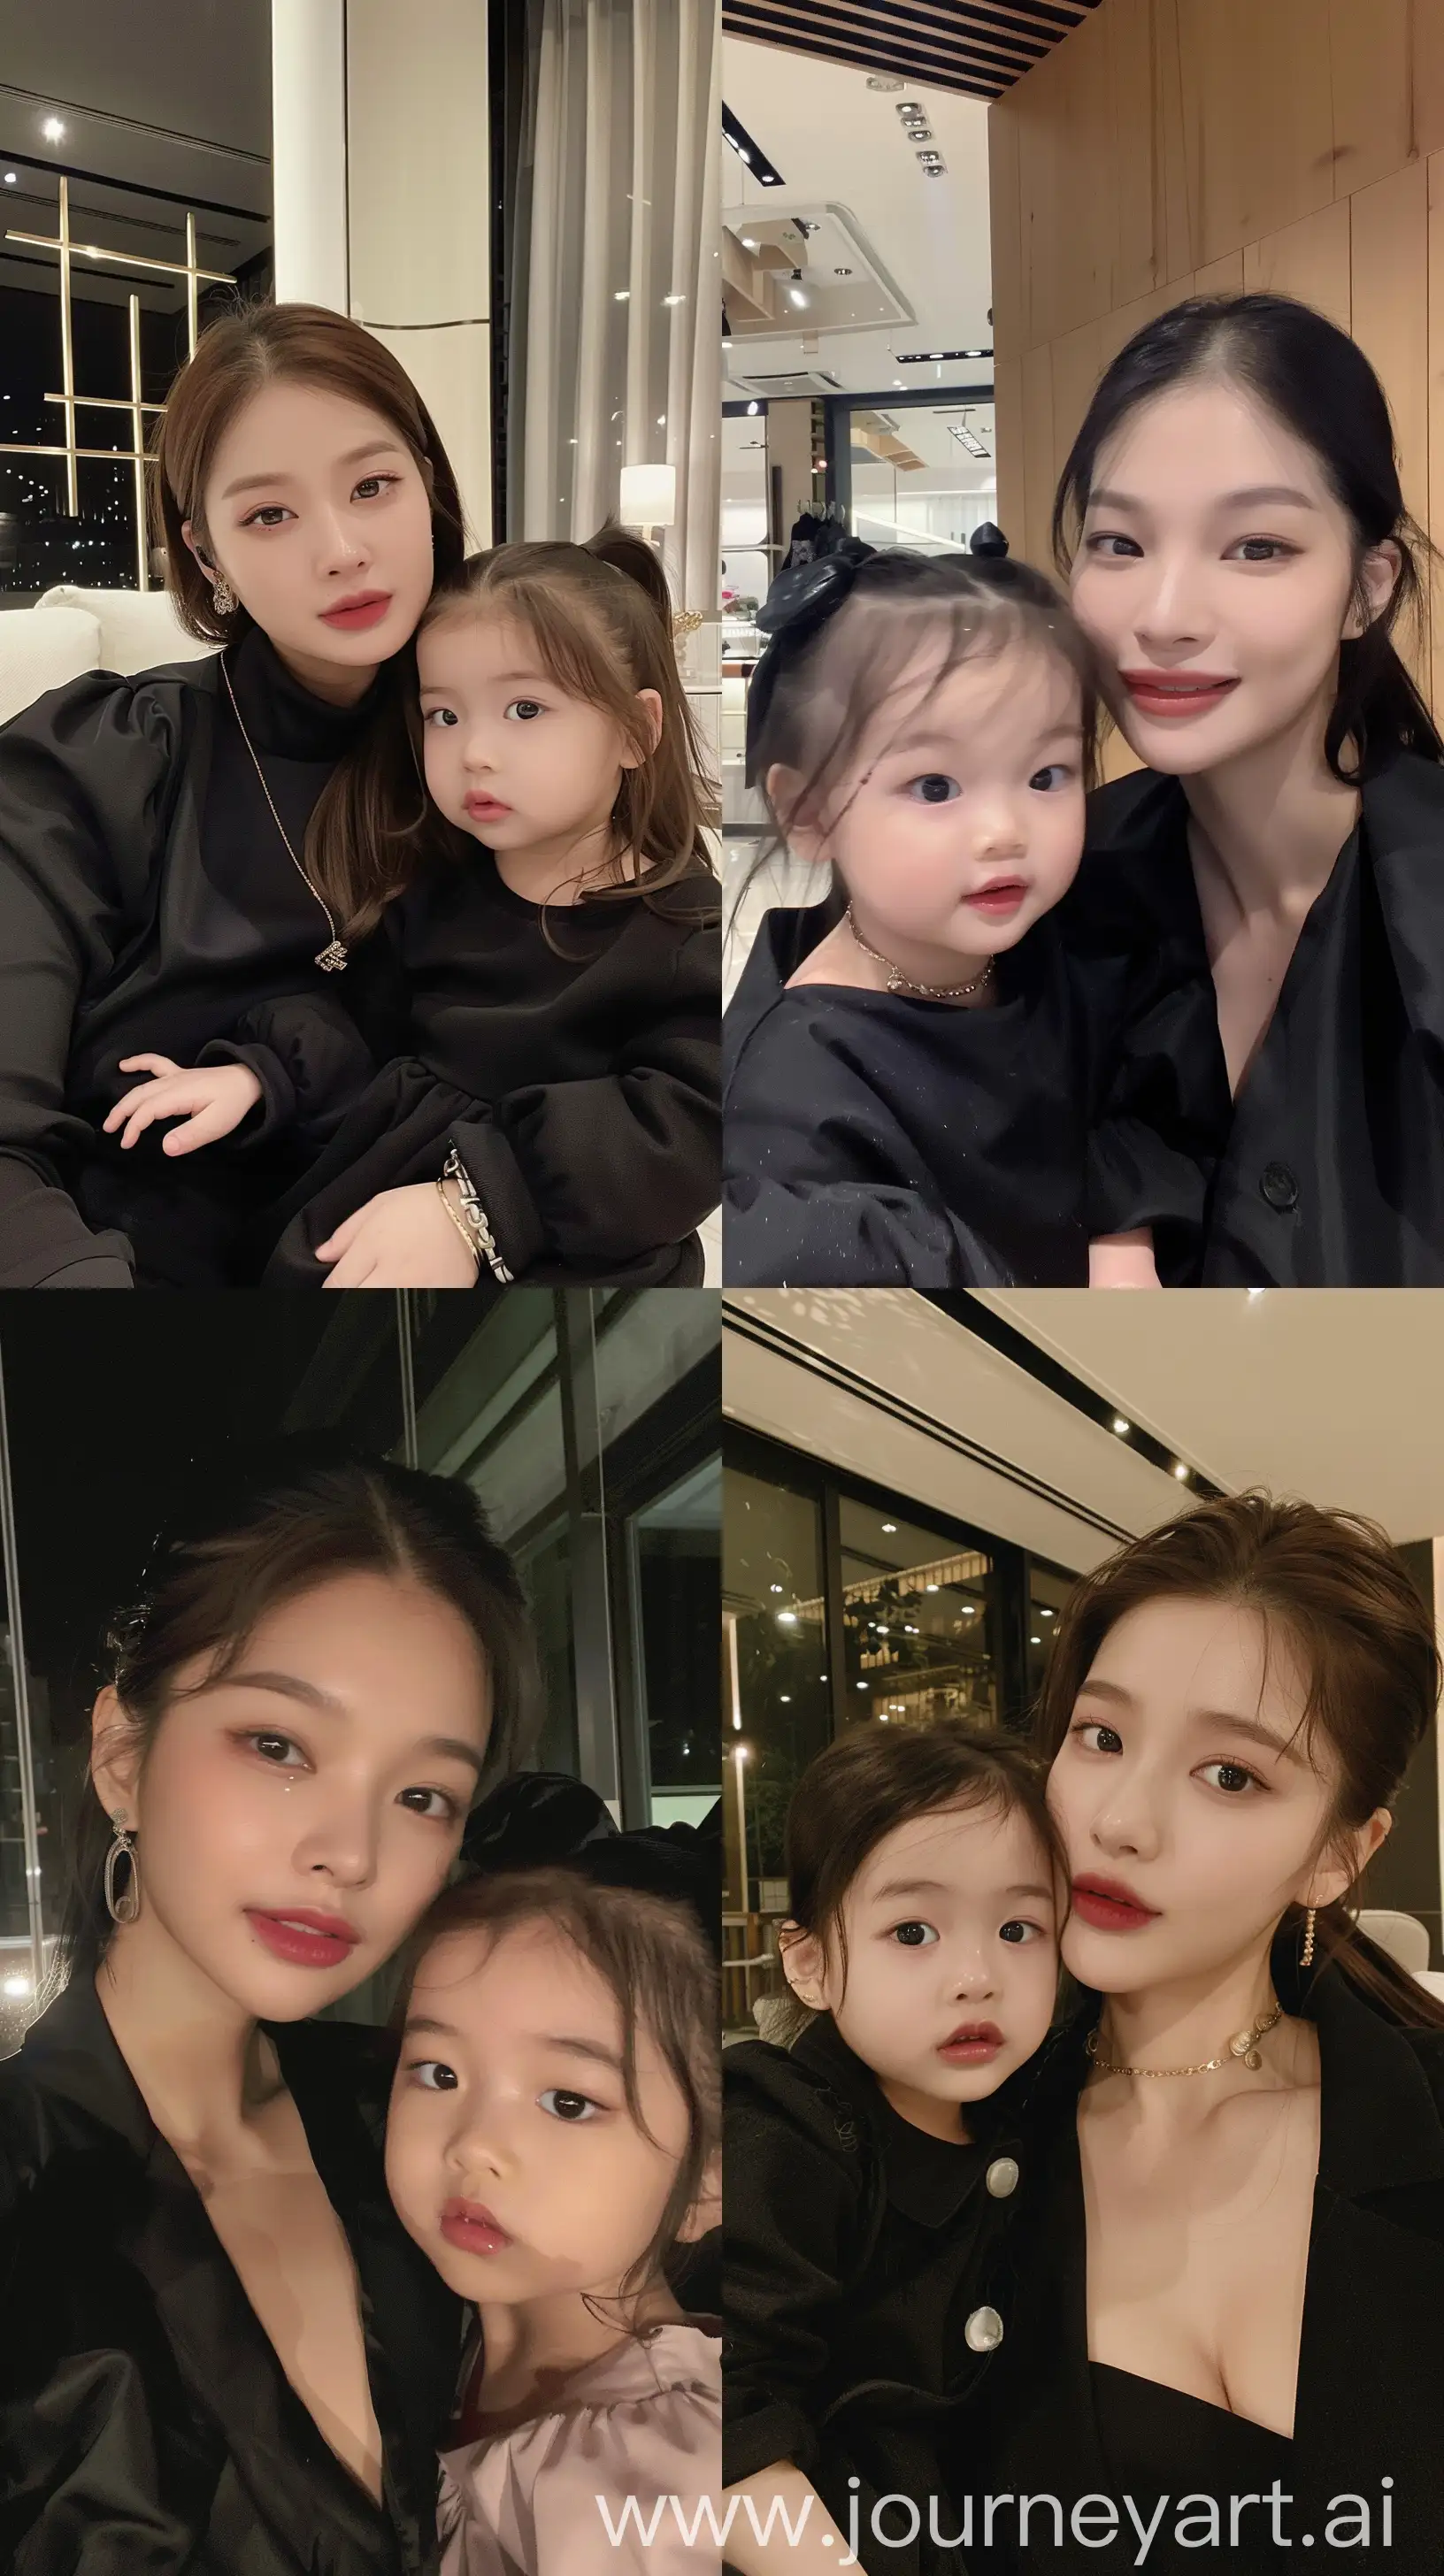 Jennies-Aesthetic-Selfie-with-Her-LookAlike-Daughter-at-Night